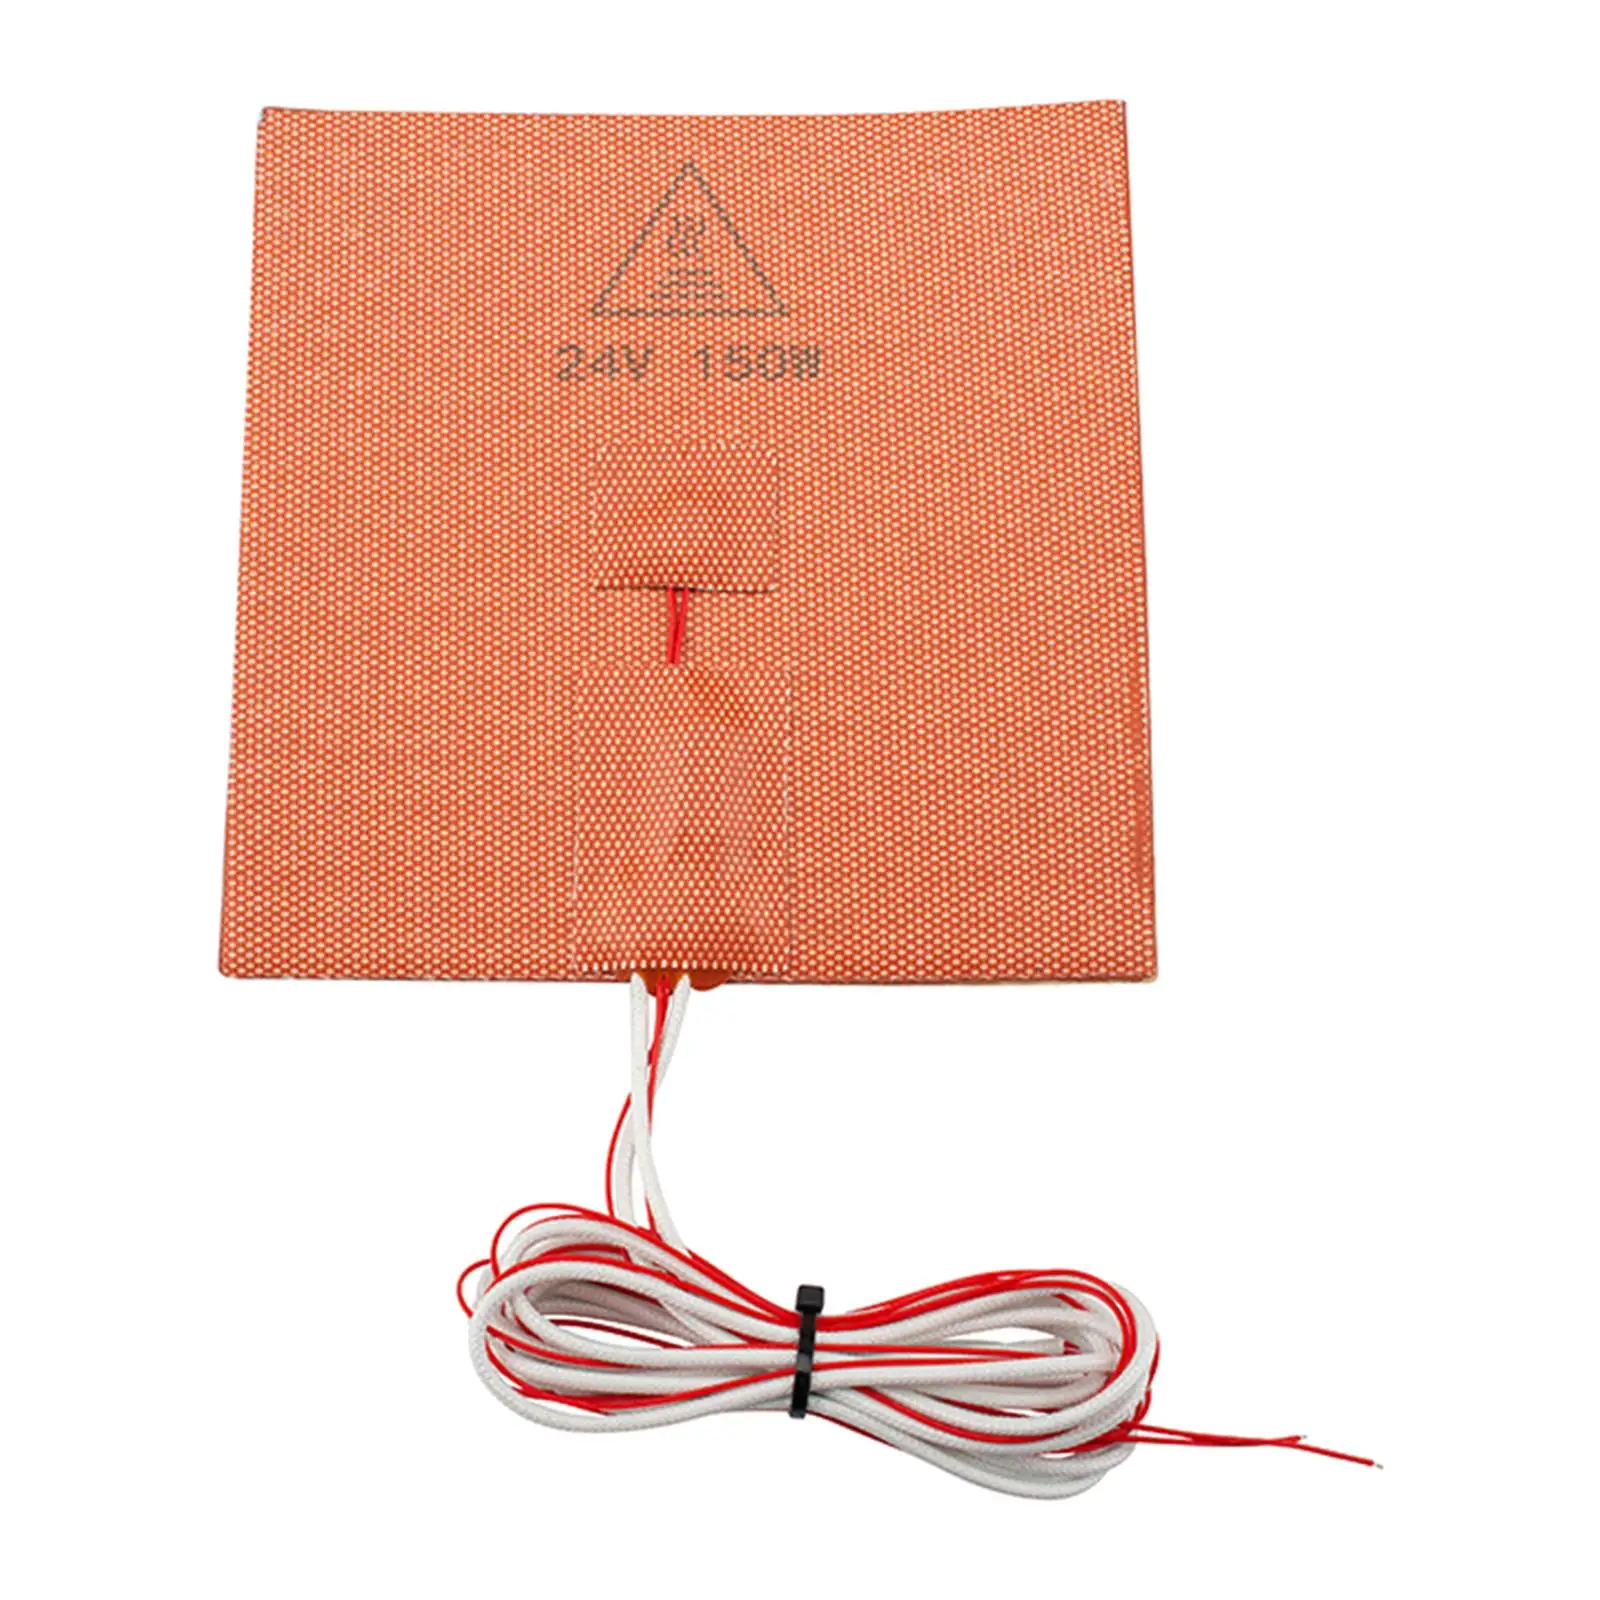 Silicone Heater Pad for 3D Printers 24V/150W Heated Bed DIY Heating Pad 150 * 150mm with 3M Adhesive 3D Printer Tools